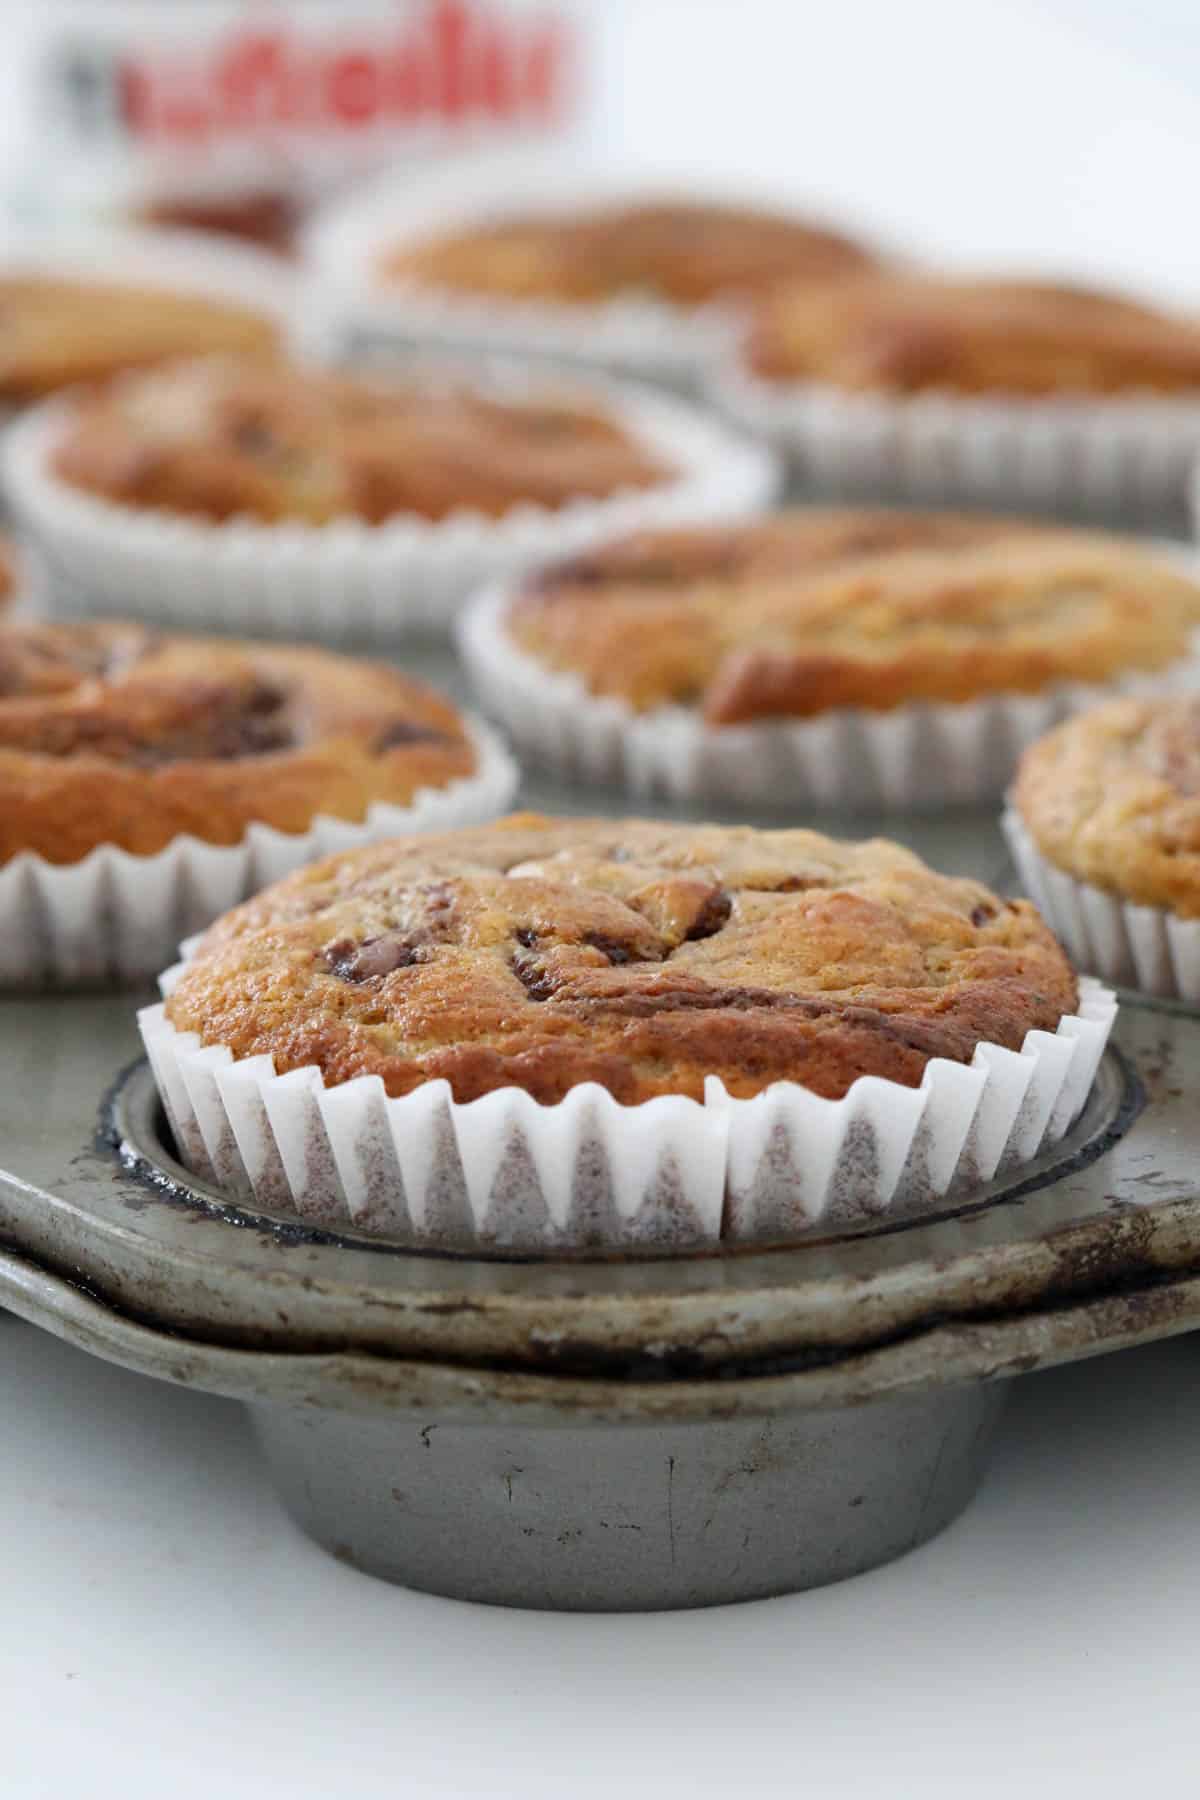 Baked muffins in paper cases in a muffin tray.